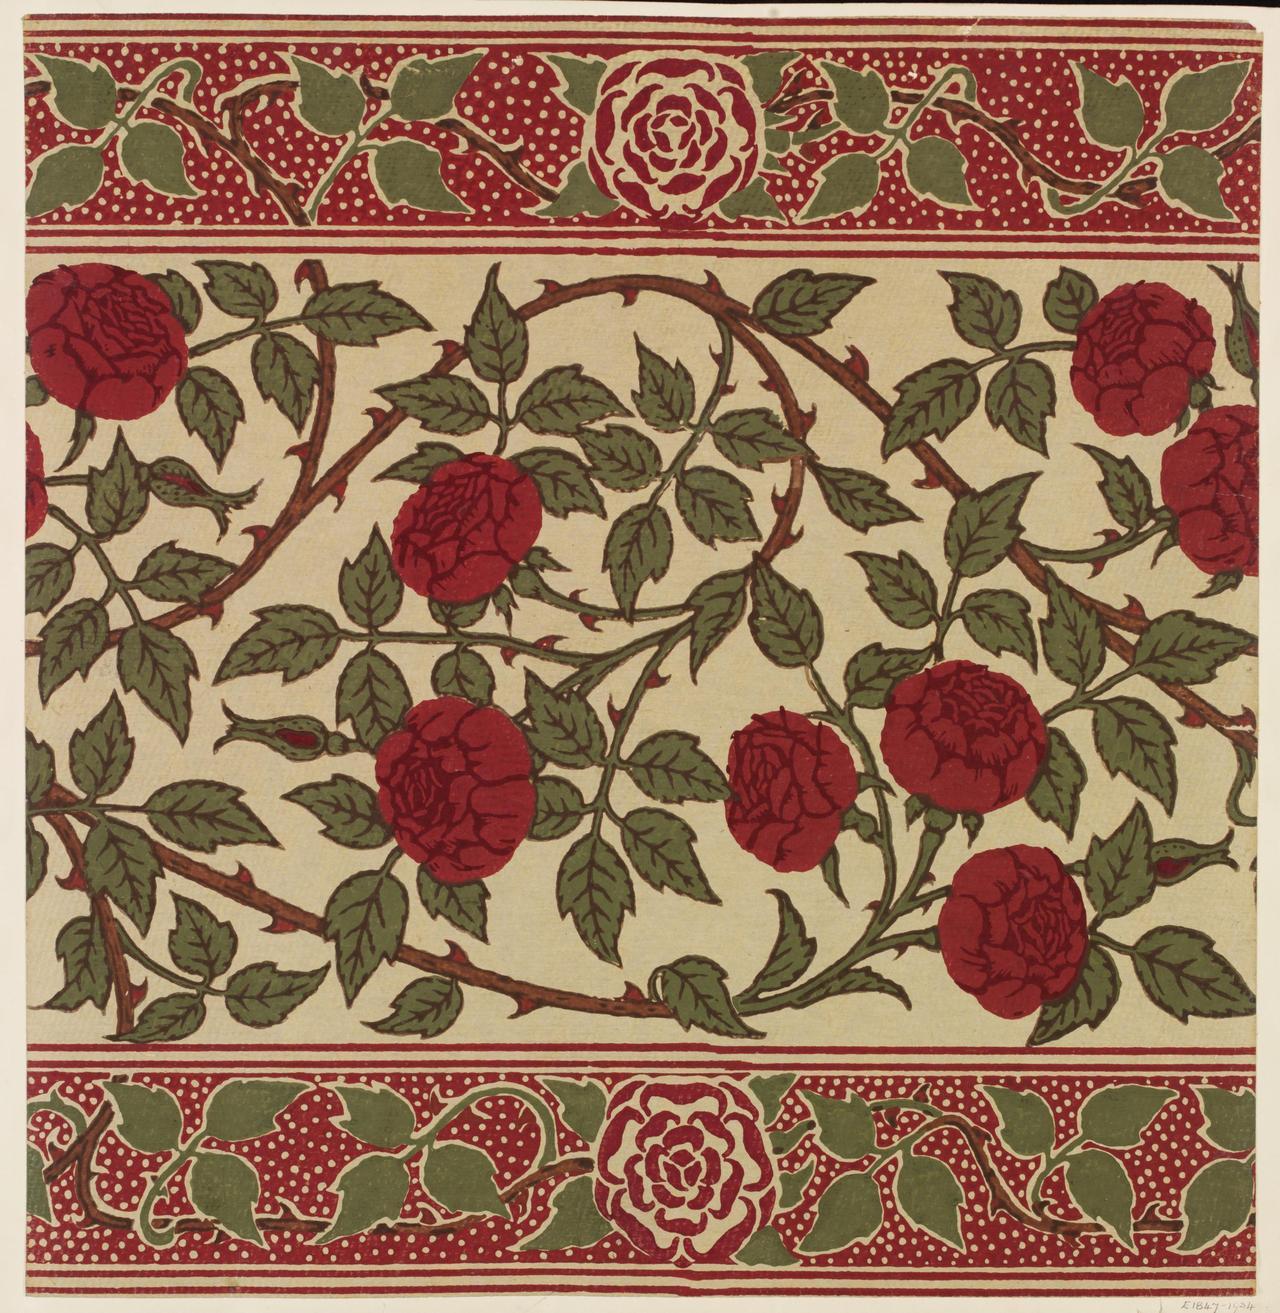 Portion Of A Frieze For Use With The ‘rosamund’ Wallpaper - Walter Crane Rose - HD Wallpaper 